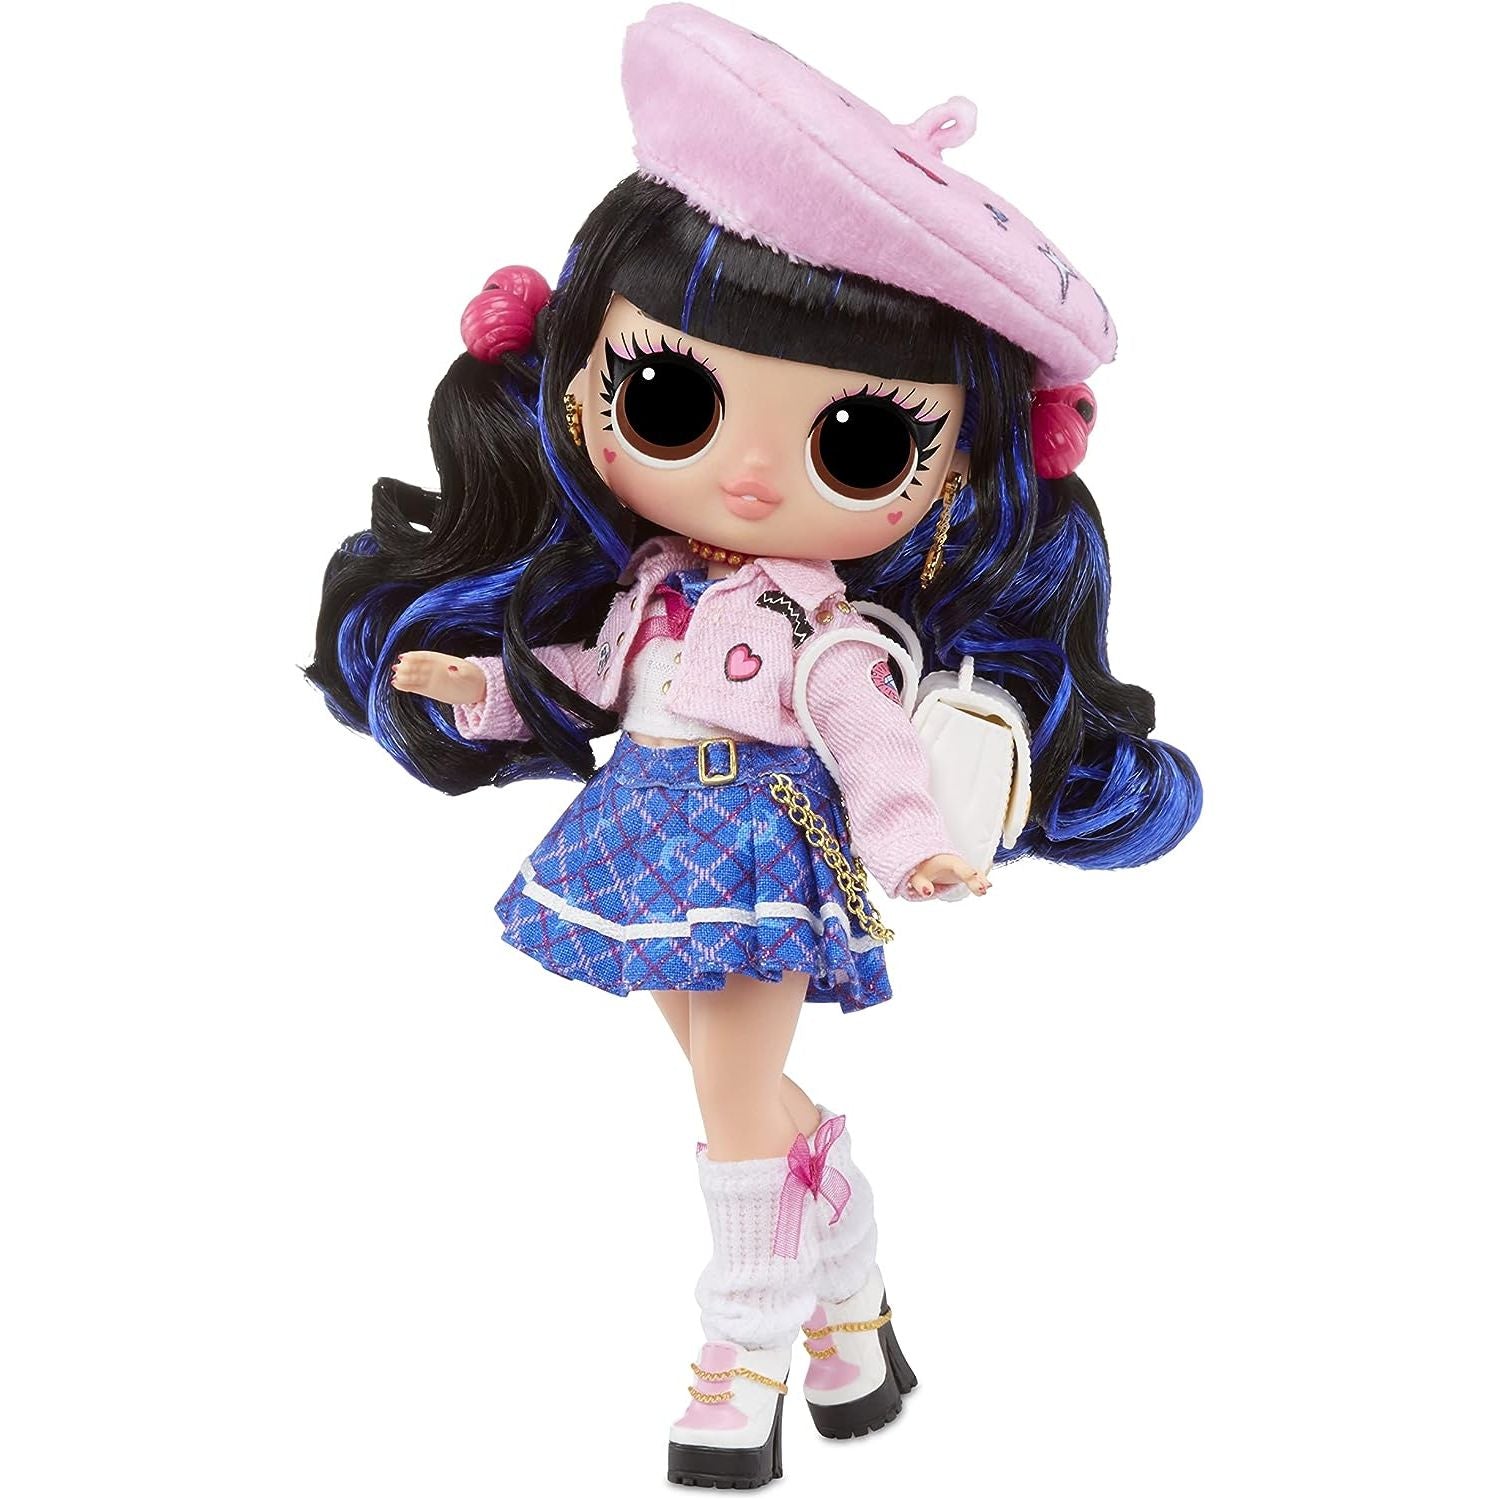 L.O.L. Surprise! Tweens Series 2 Fashion Doll Aya Cherry with 15 Surprises Including Pink Outfit and Accessories for Fashion Toy Girls